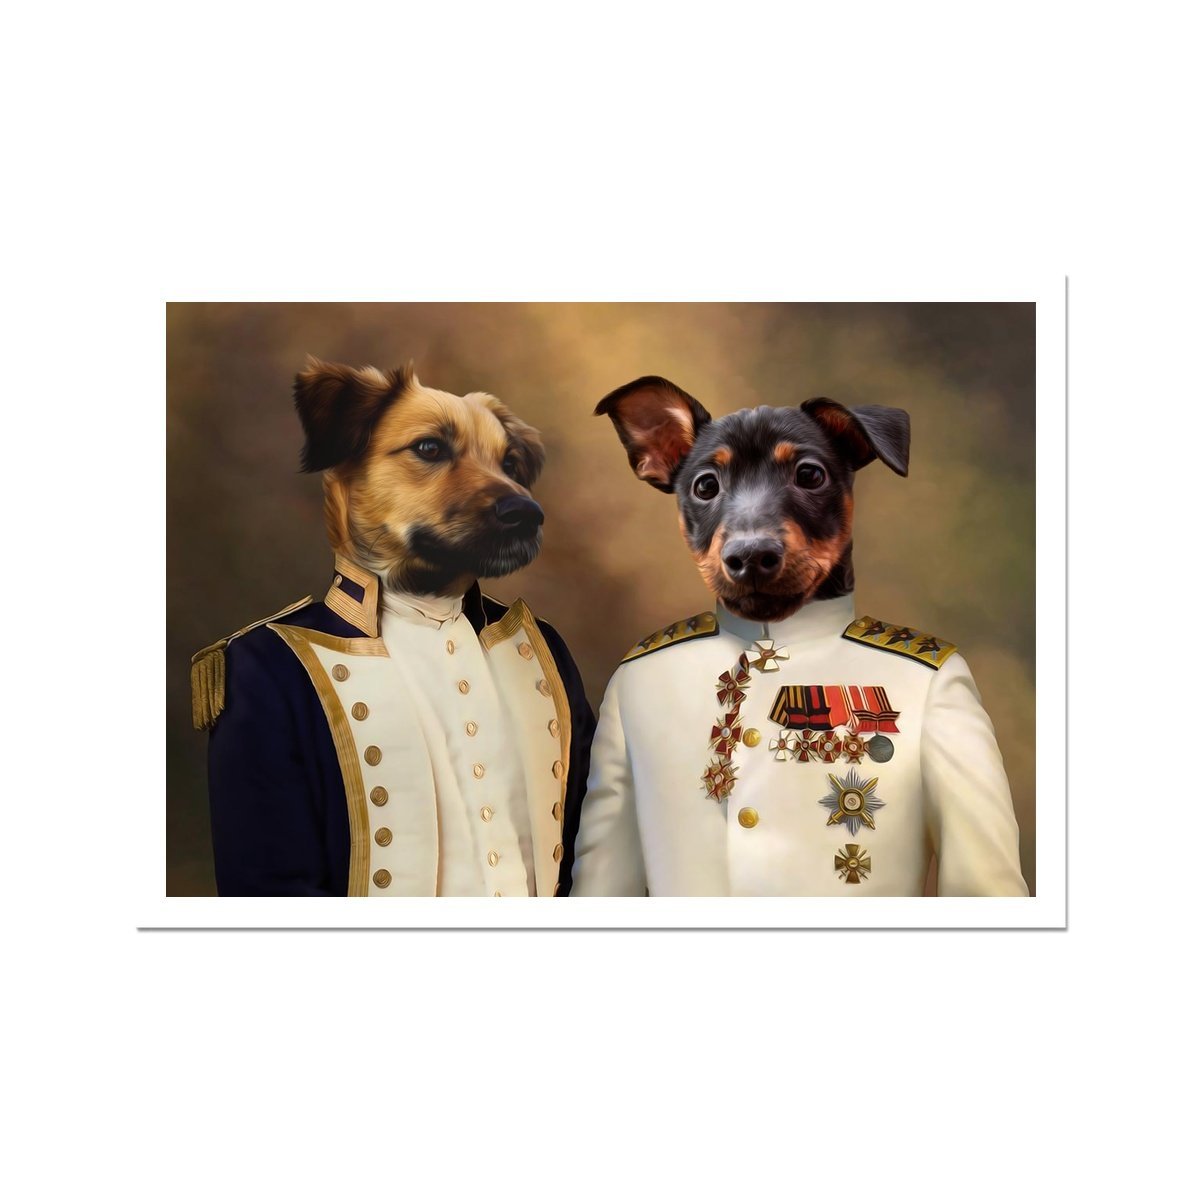 The Admiral & The Sargent: Custom Pet Poster - Paw & Glory - #pet portraits# - #dog portraits# - #pet portraits uk#Paw & Glory, paw and glory, aristocrat dog painting, admiral pet portrait, custom pet paintings, pet portraits, animal portrait pictures, pet portrait